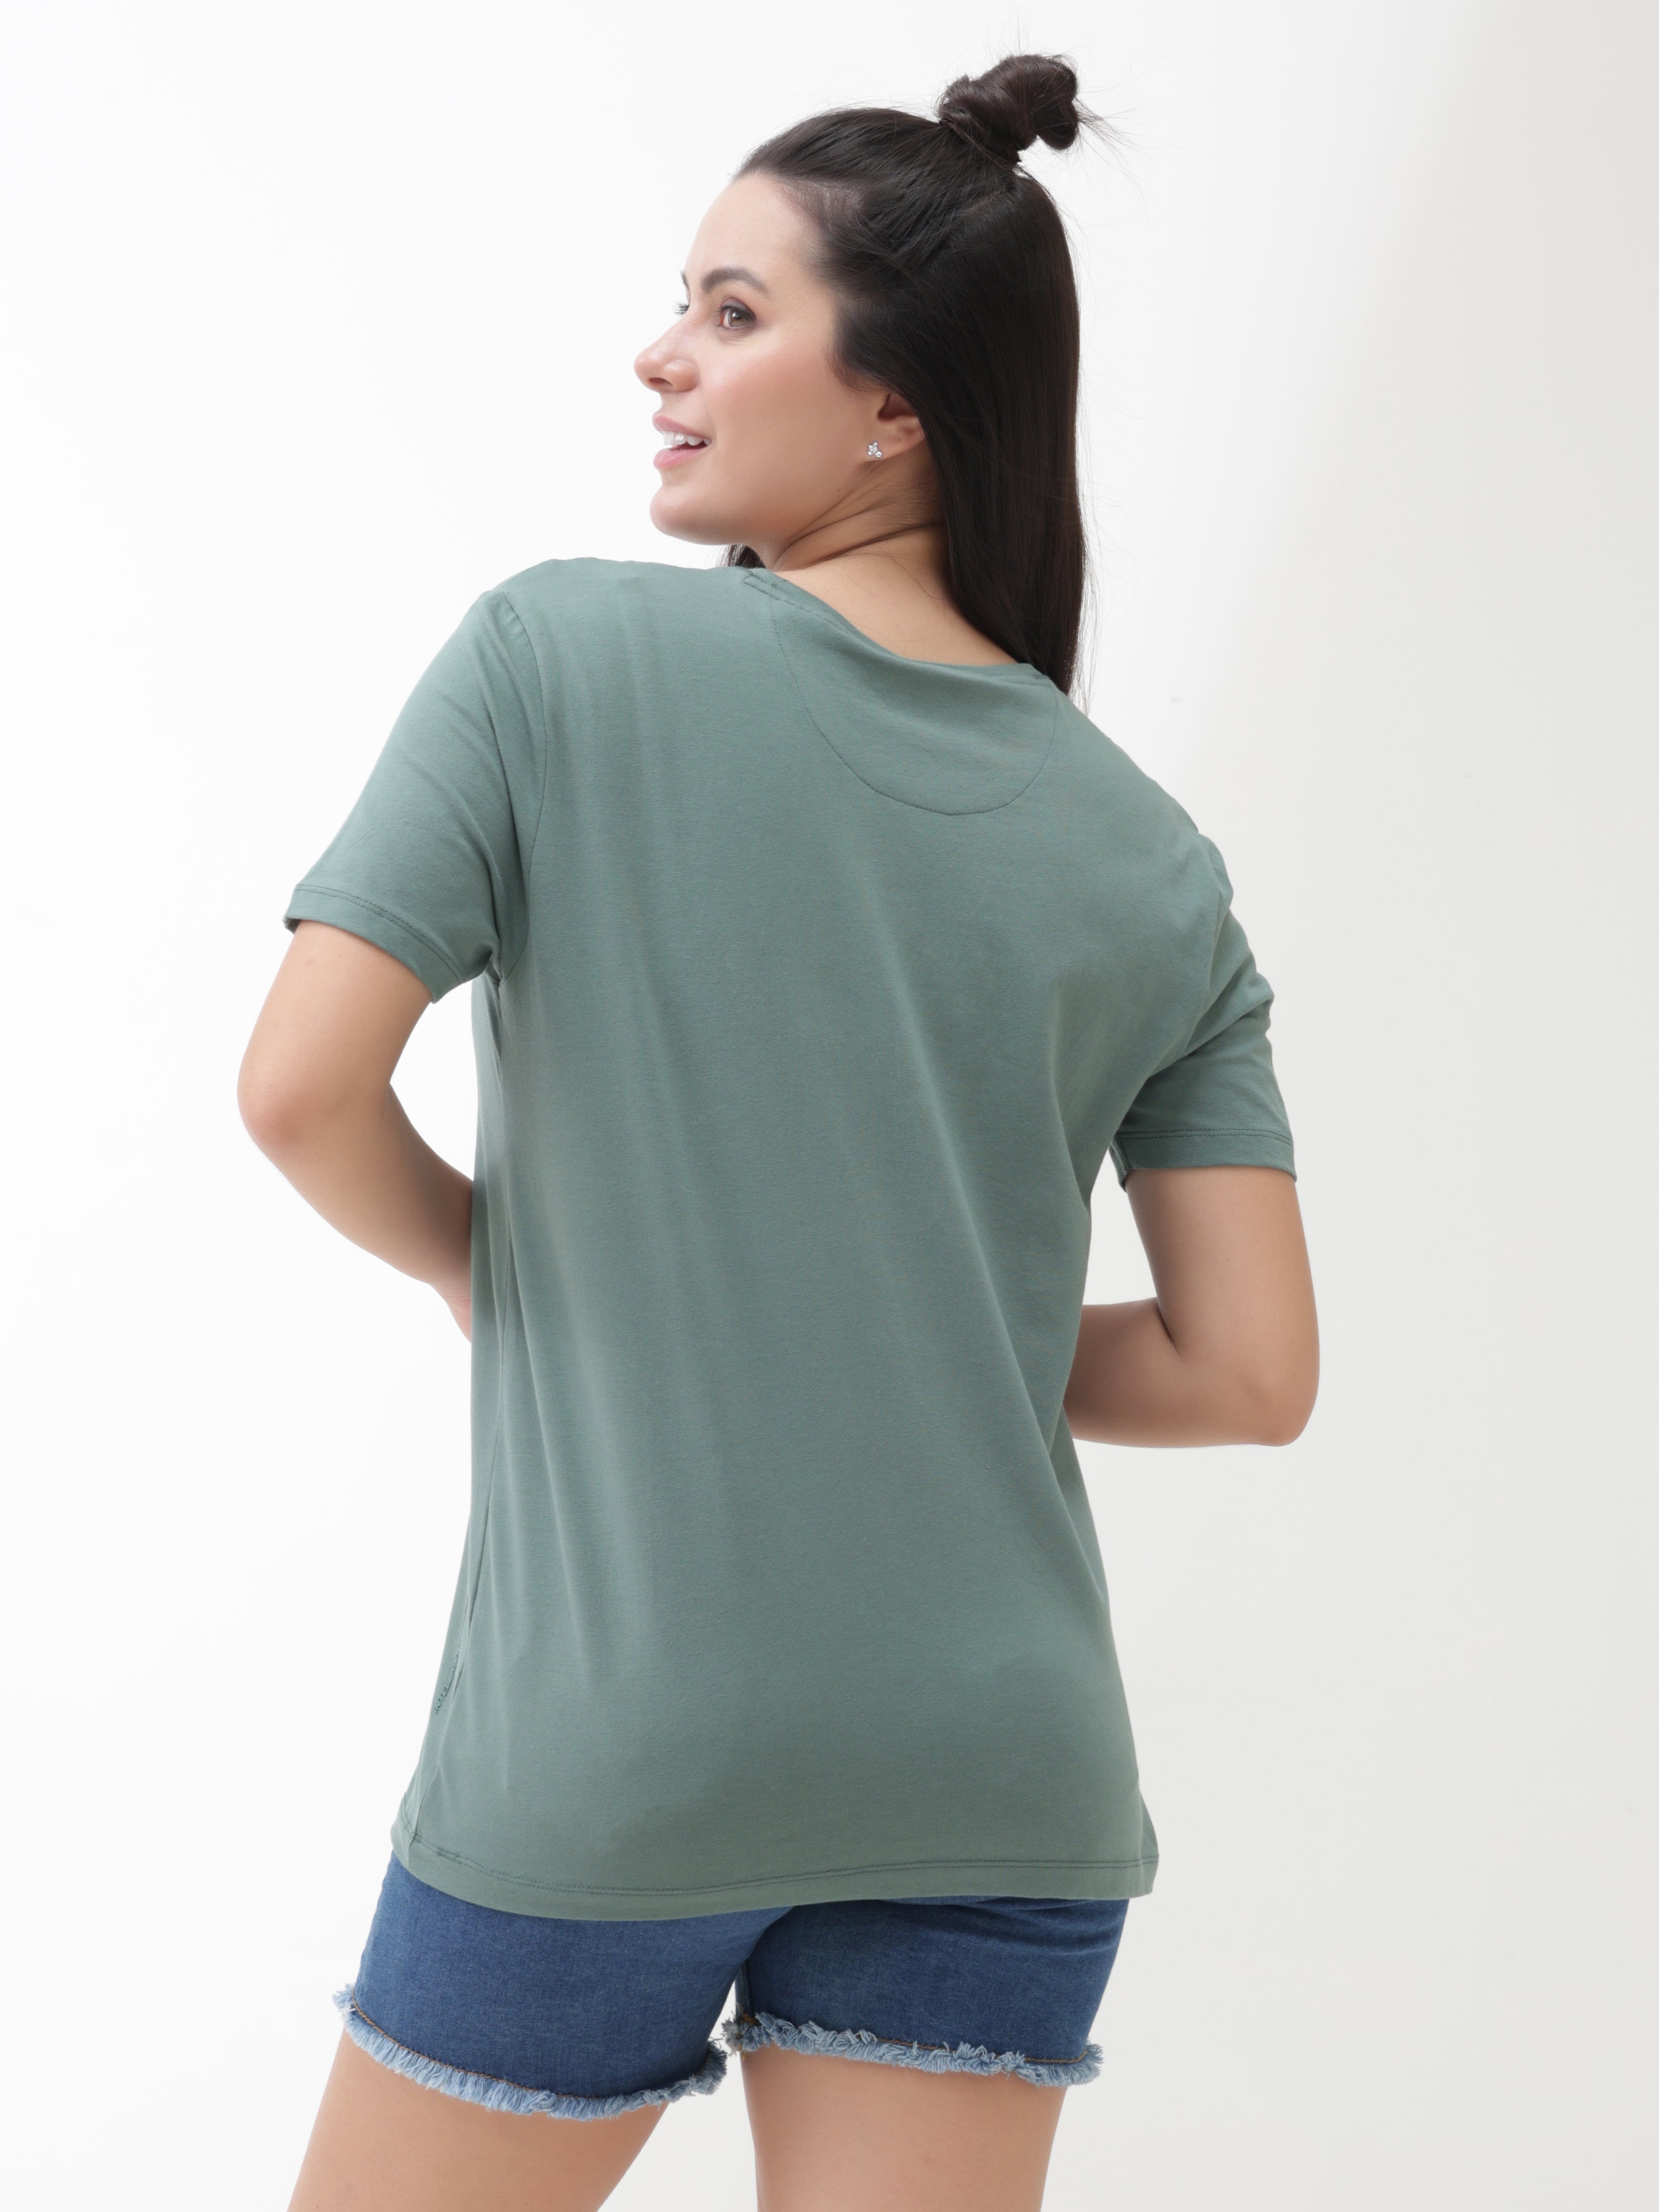 Woman wearing a Simple Green round-neck Turms T-shirt and blue shorts, showcasing the back view of the stain-proof and odor-resistant apparel.